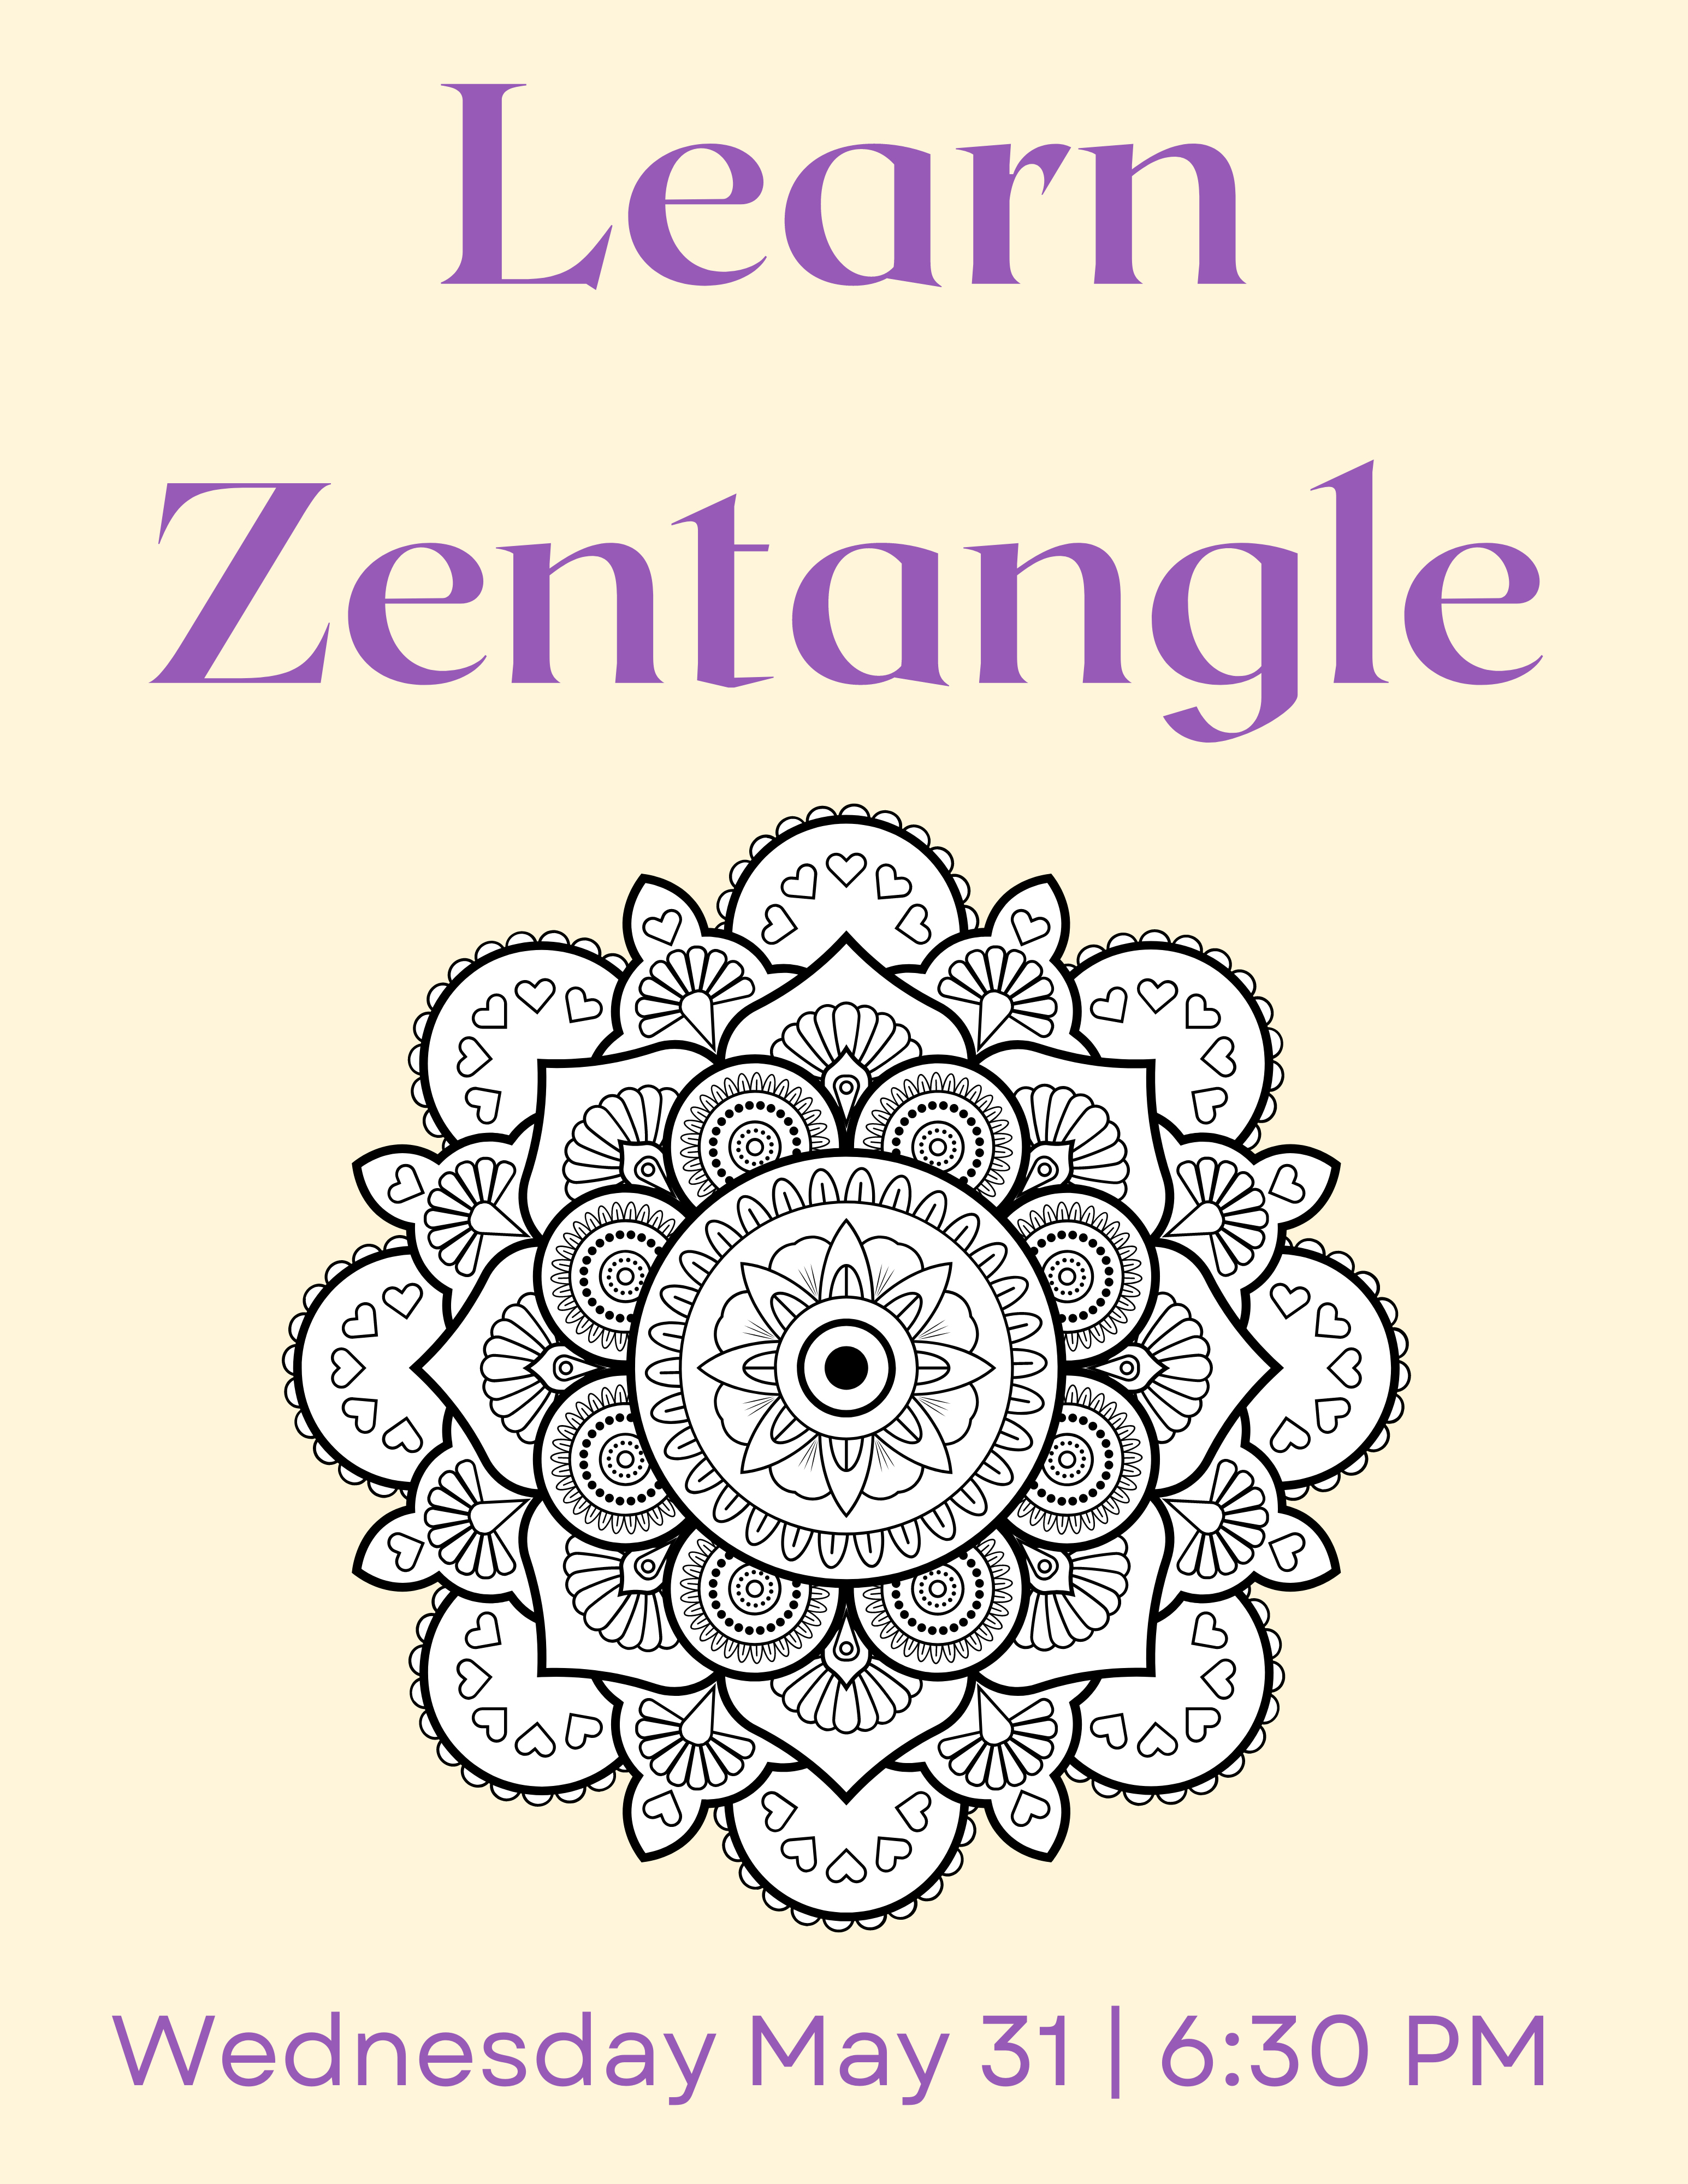 Learn Zentangle Wednesday May 31 6:30 Pm symmetrical shapes form a complex flower pattern